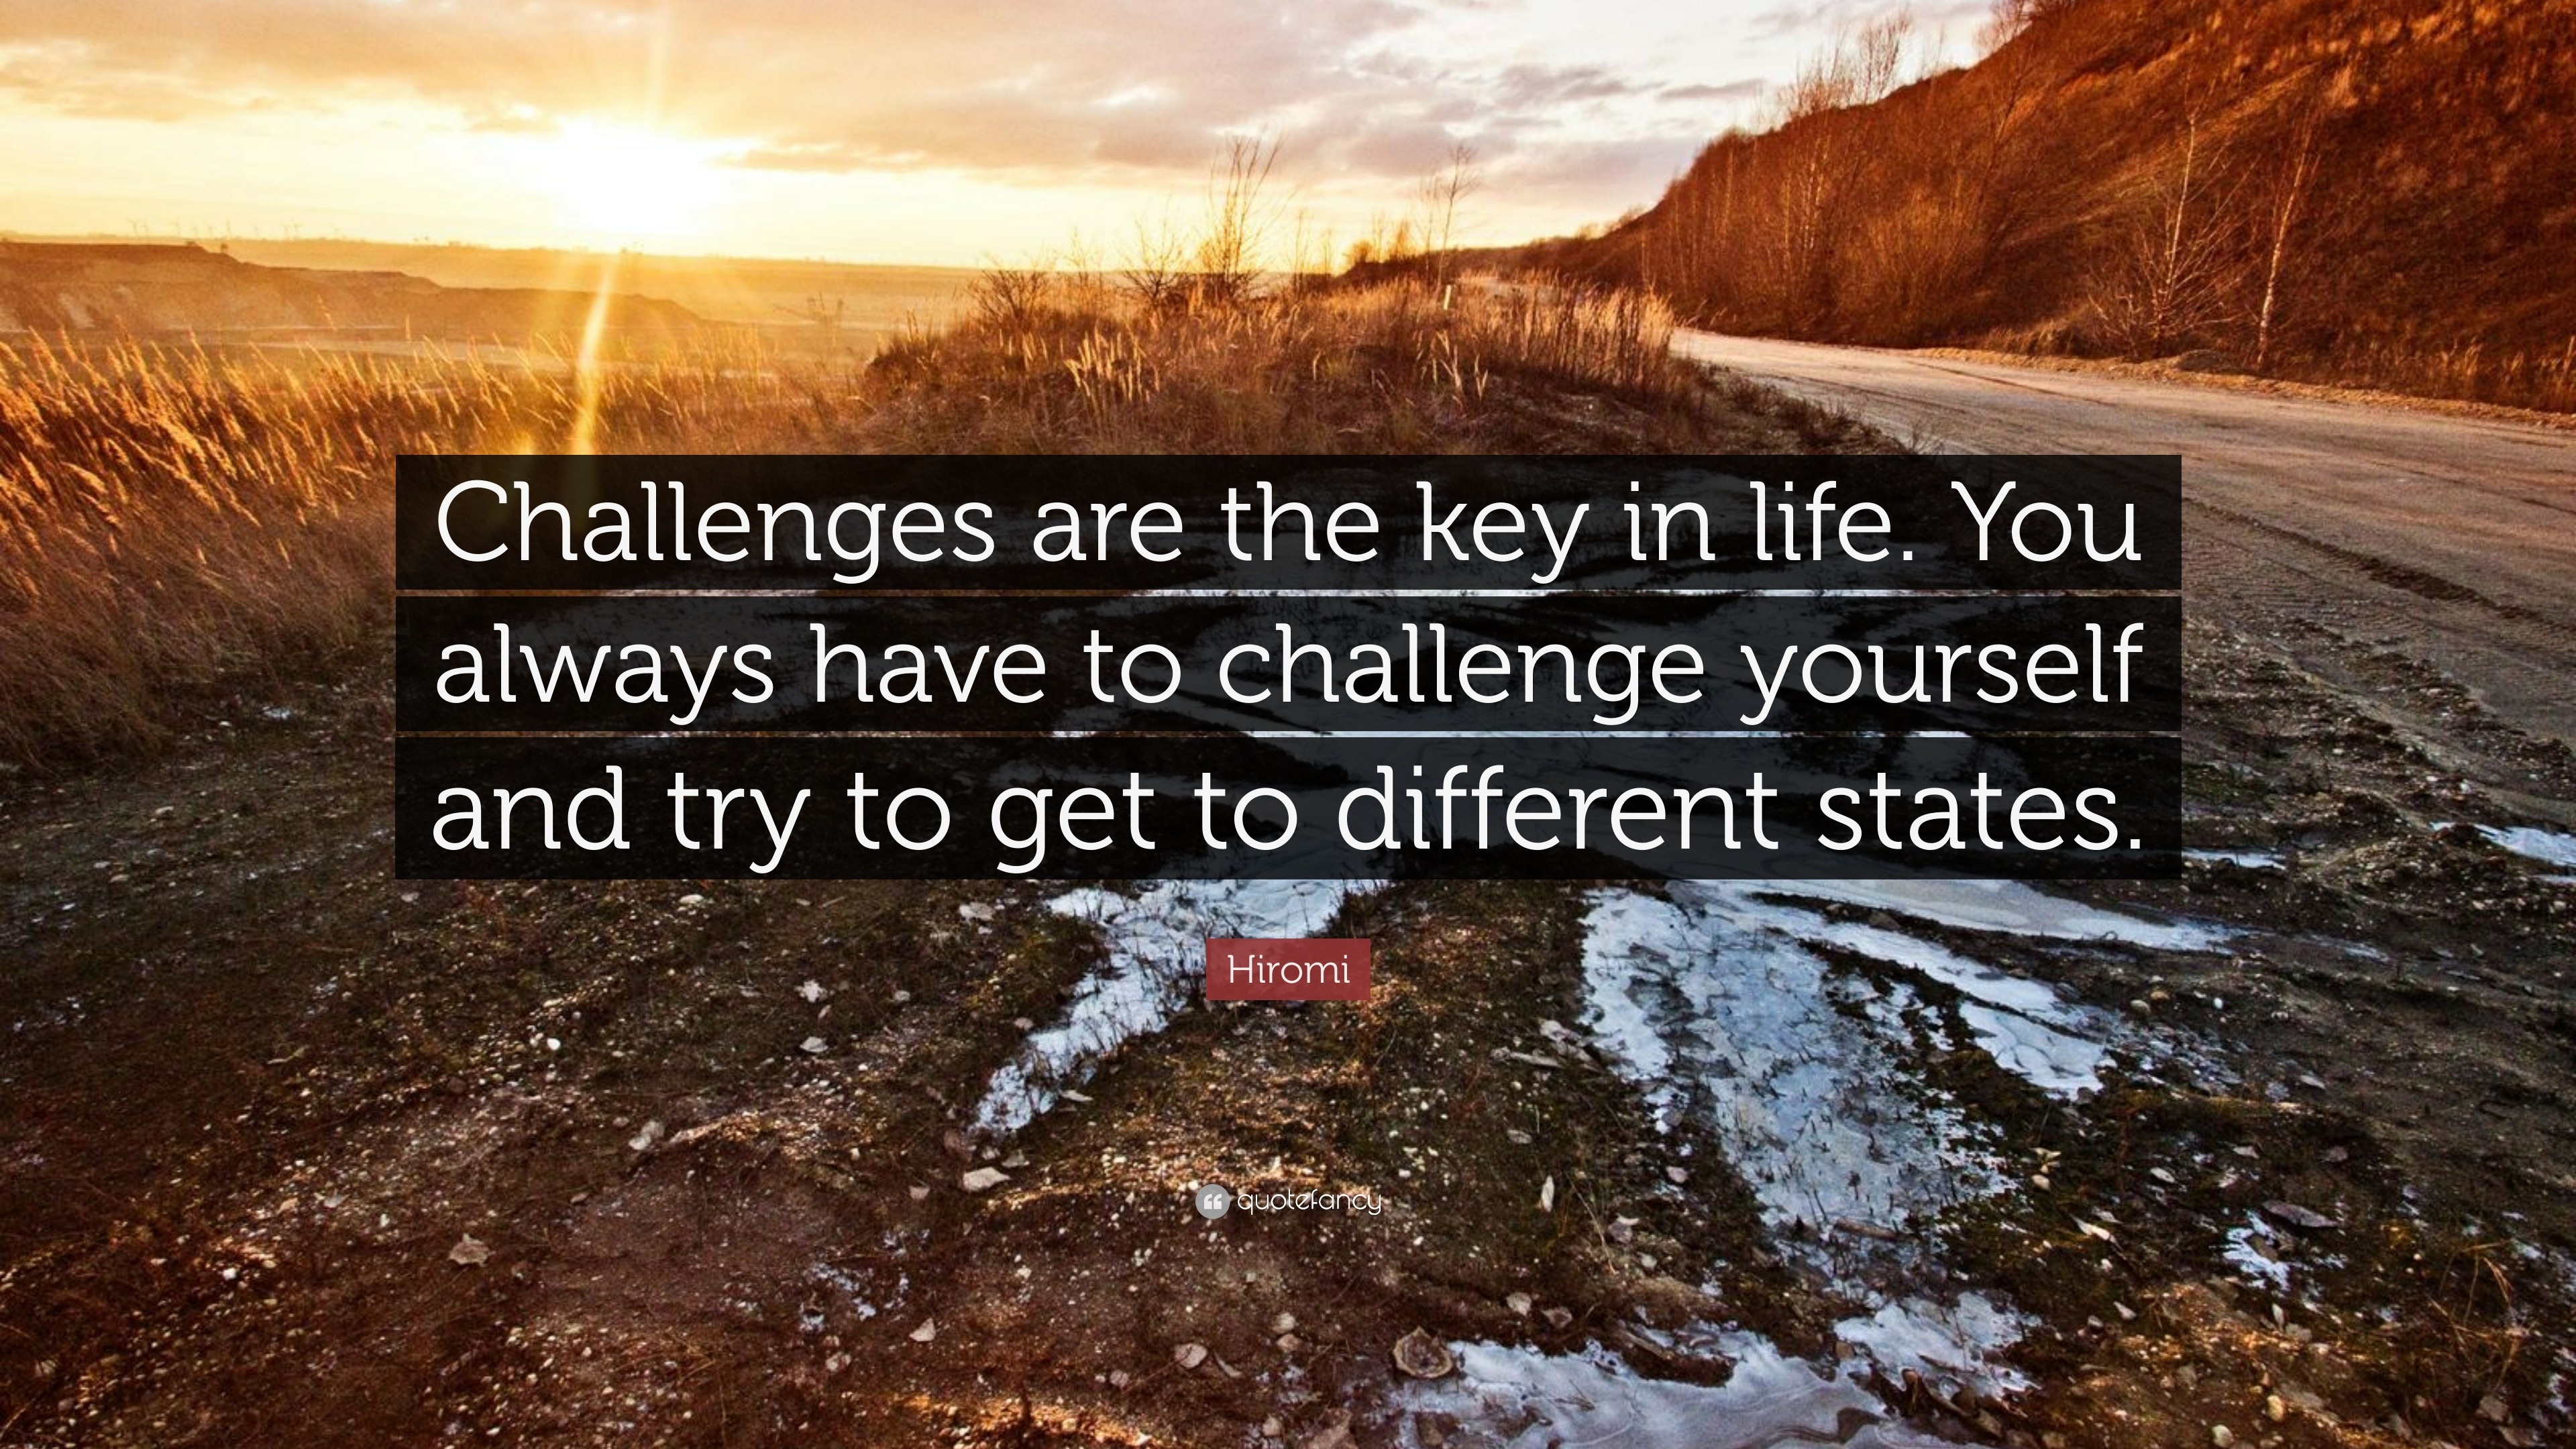 Hiromi Quote “Challenges are the key in life. You always have to